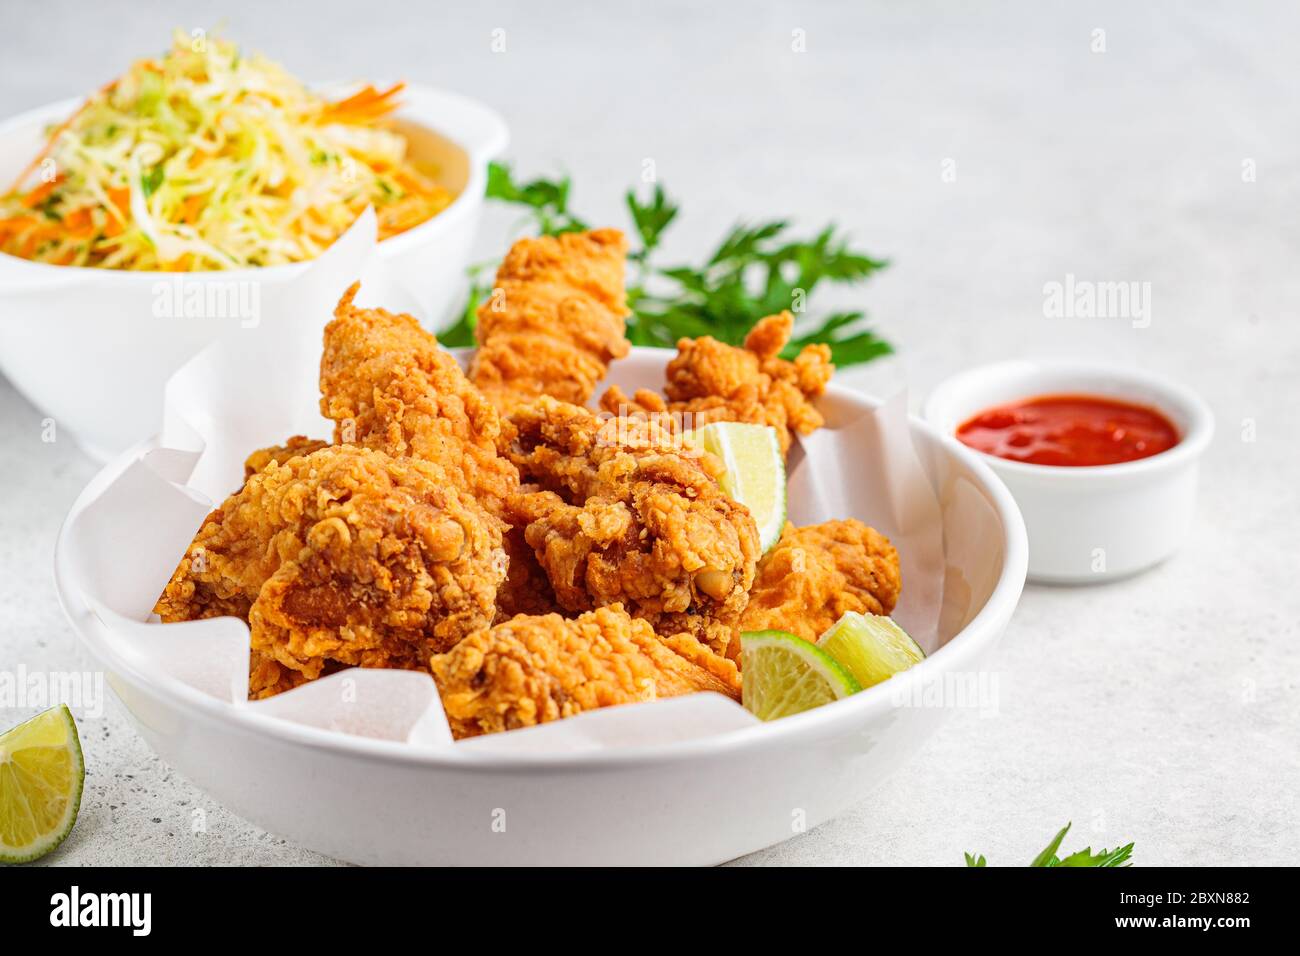 Crispy fried chicken in a white bowl. Stock Photo